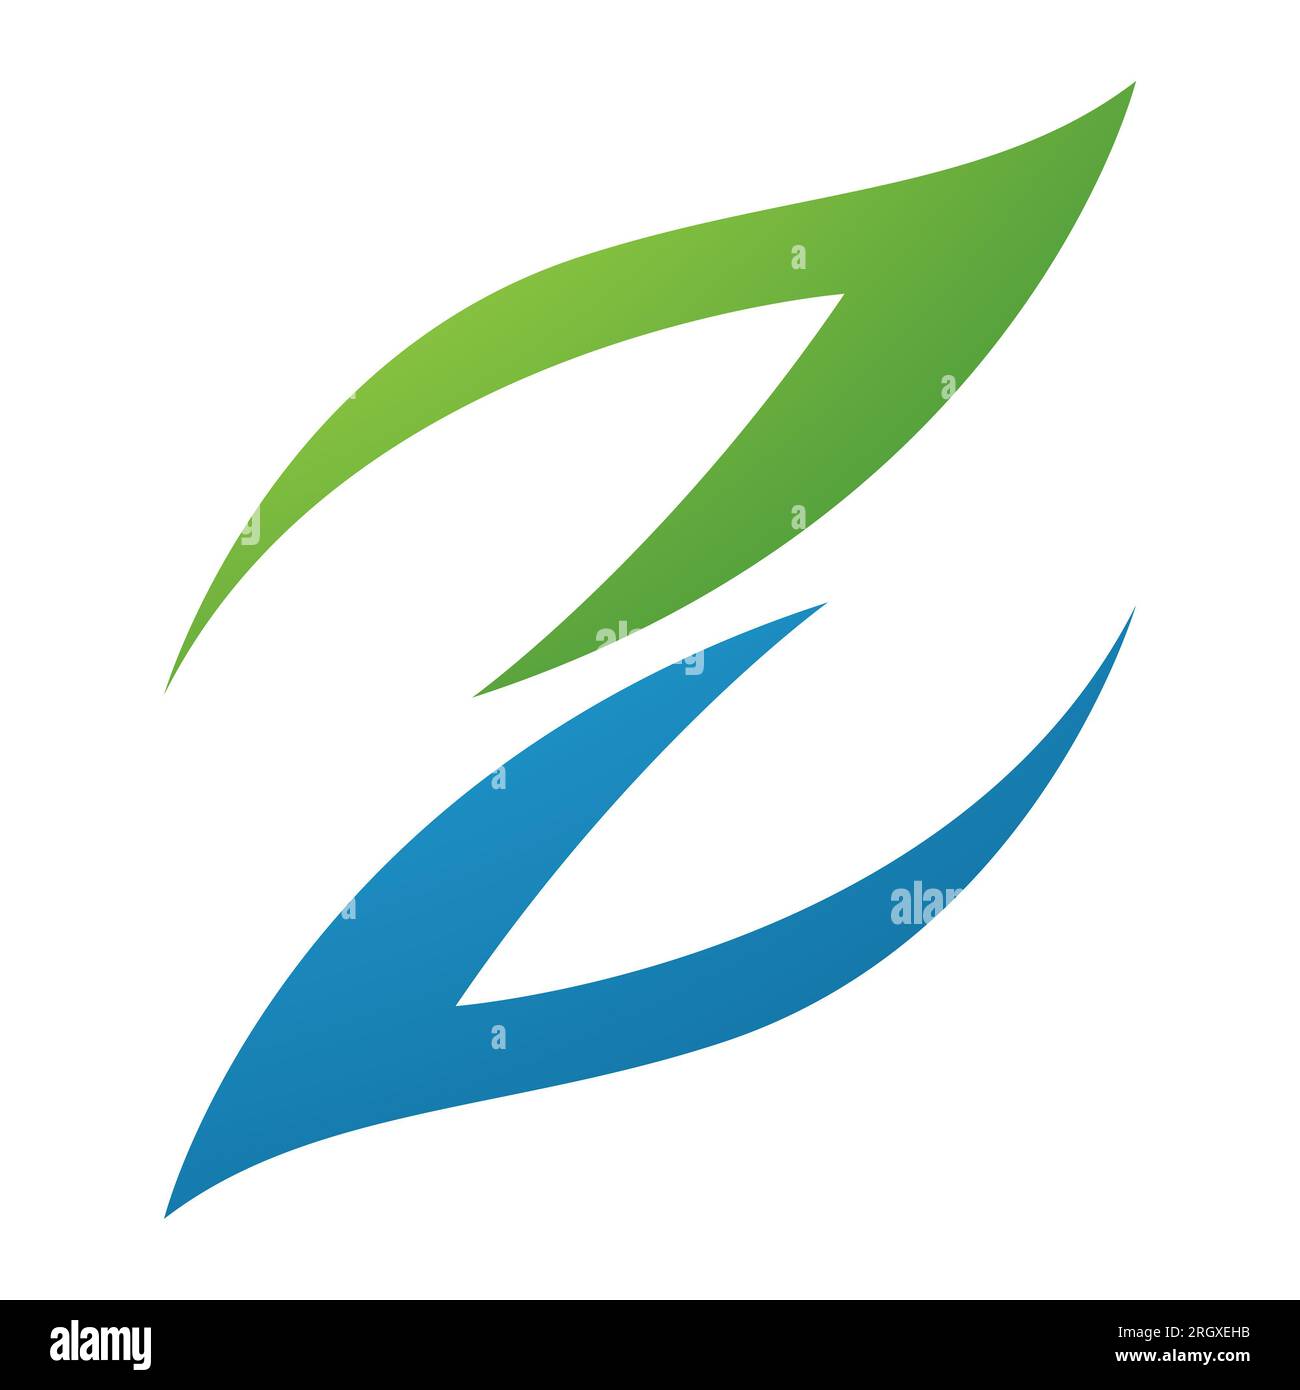 Green and Blue Fire Shaped Letter Z Icon on a White Background Stock Photo